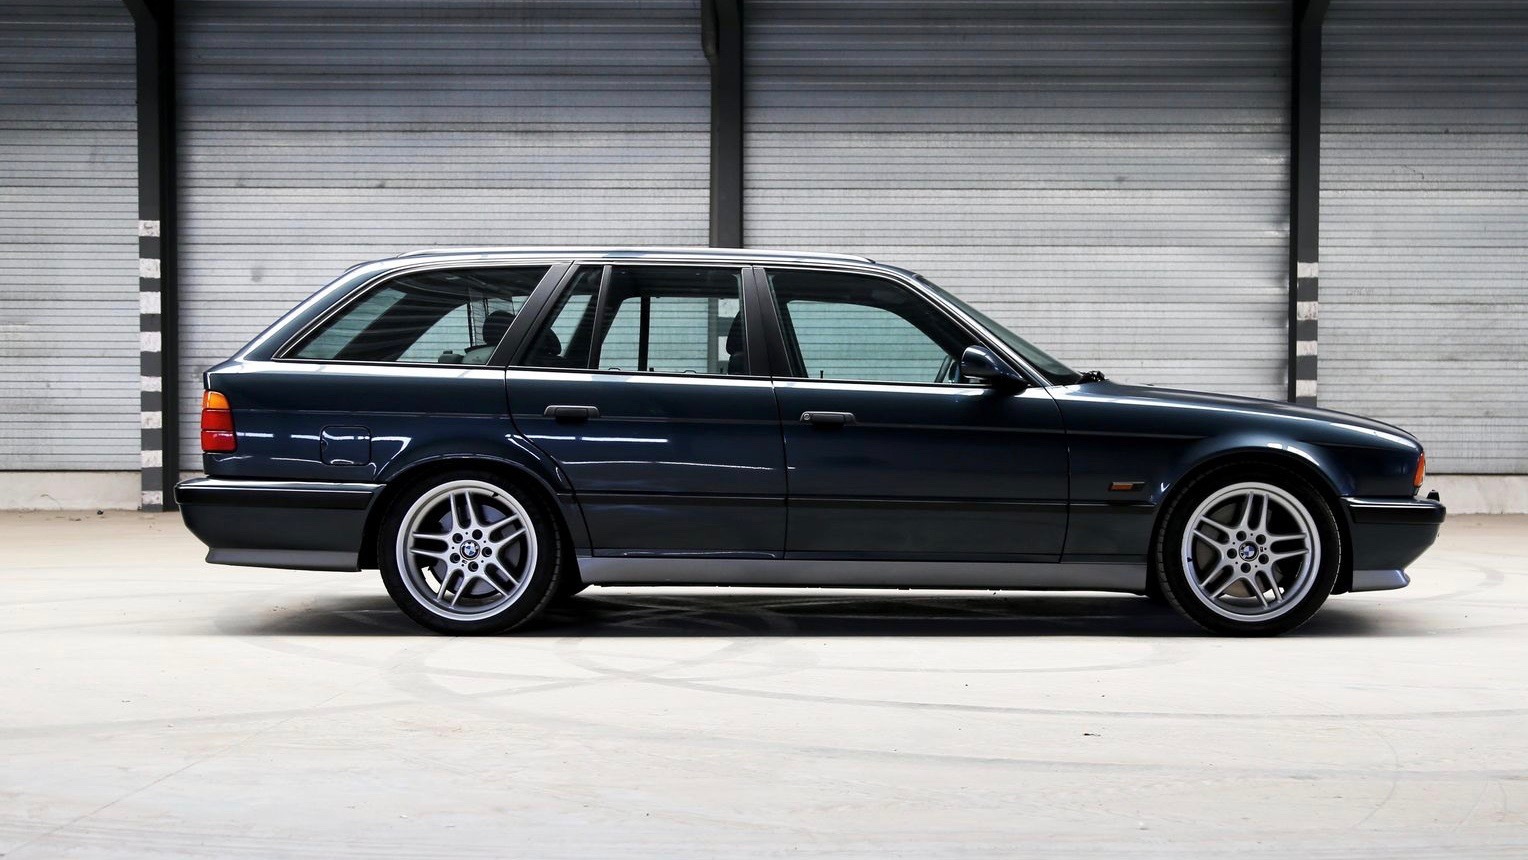 1995 BMW M5 Touring (Photo by Car Cave USA)